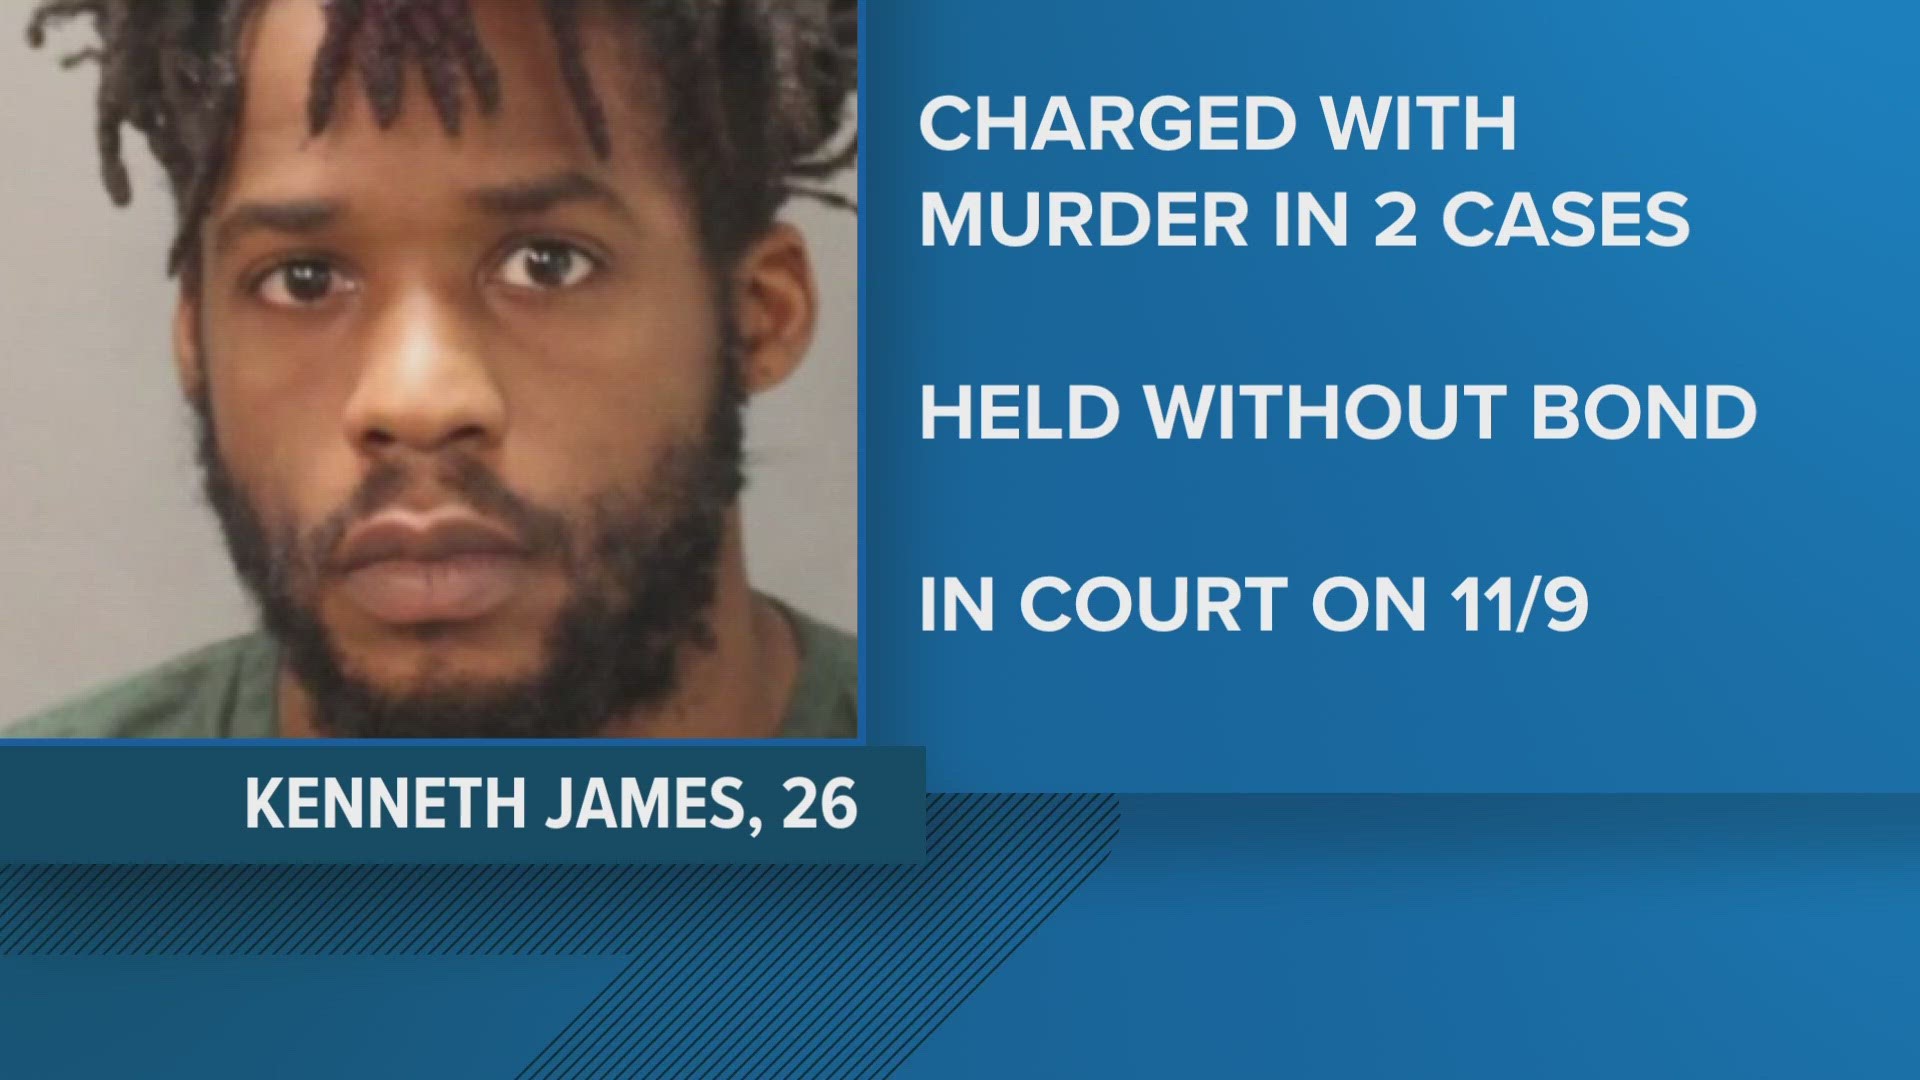 Kenneth James Jr. is accused of shooting a man who was riding in his car leaving a rap studio in September. Now, police are charging him in another murder.